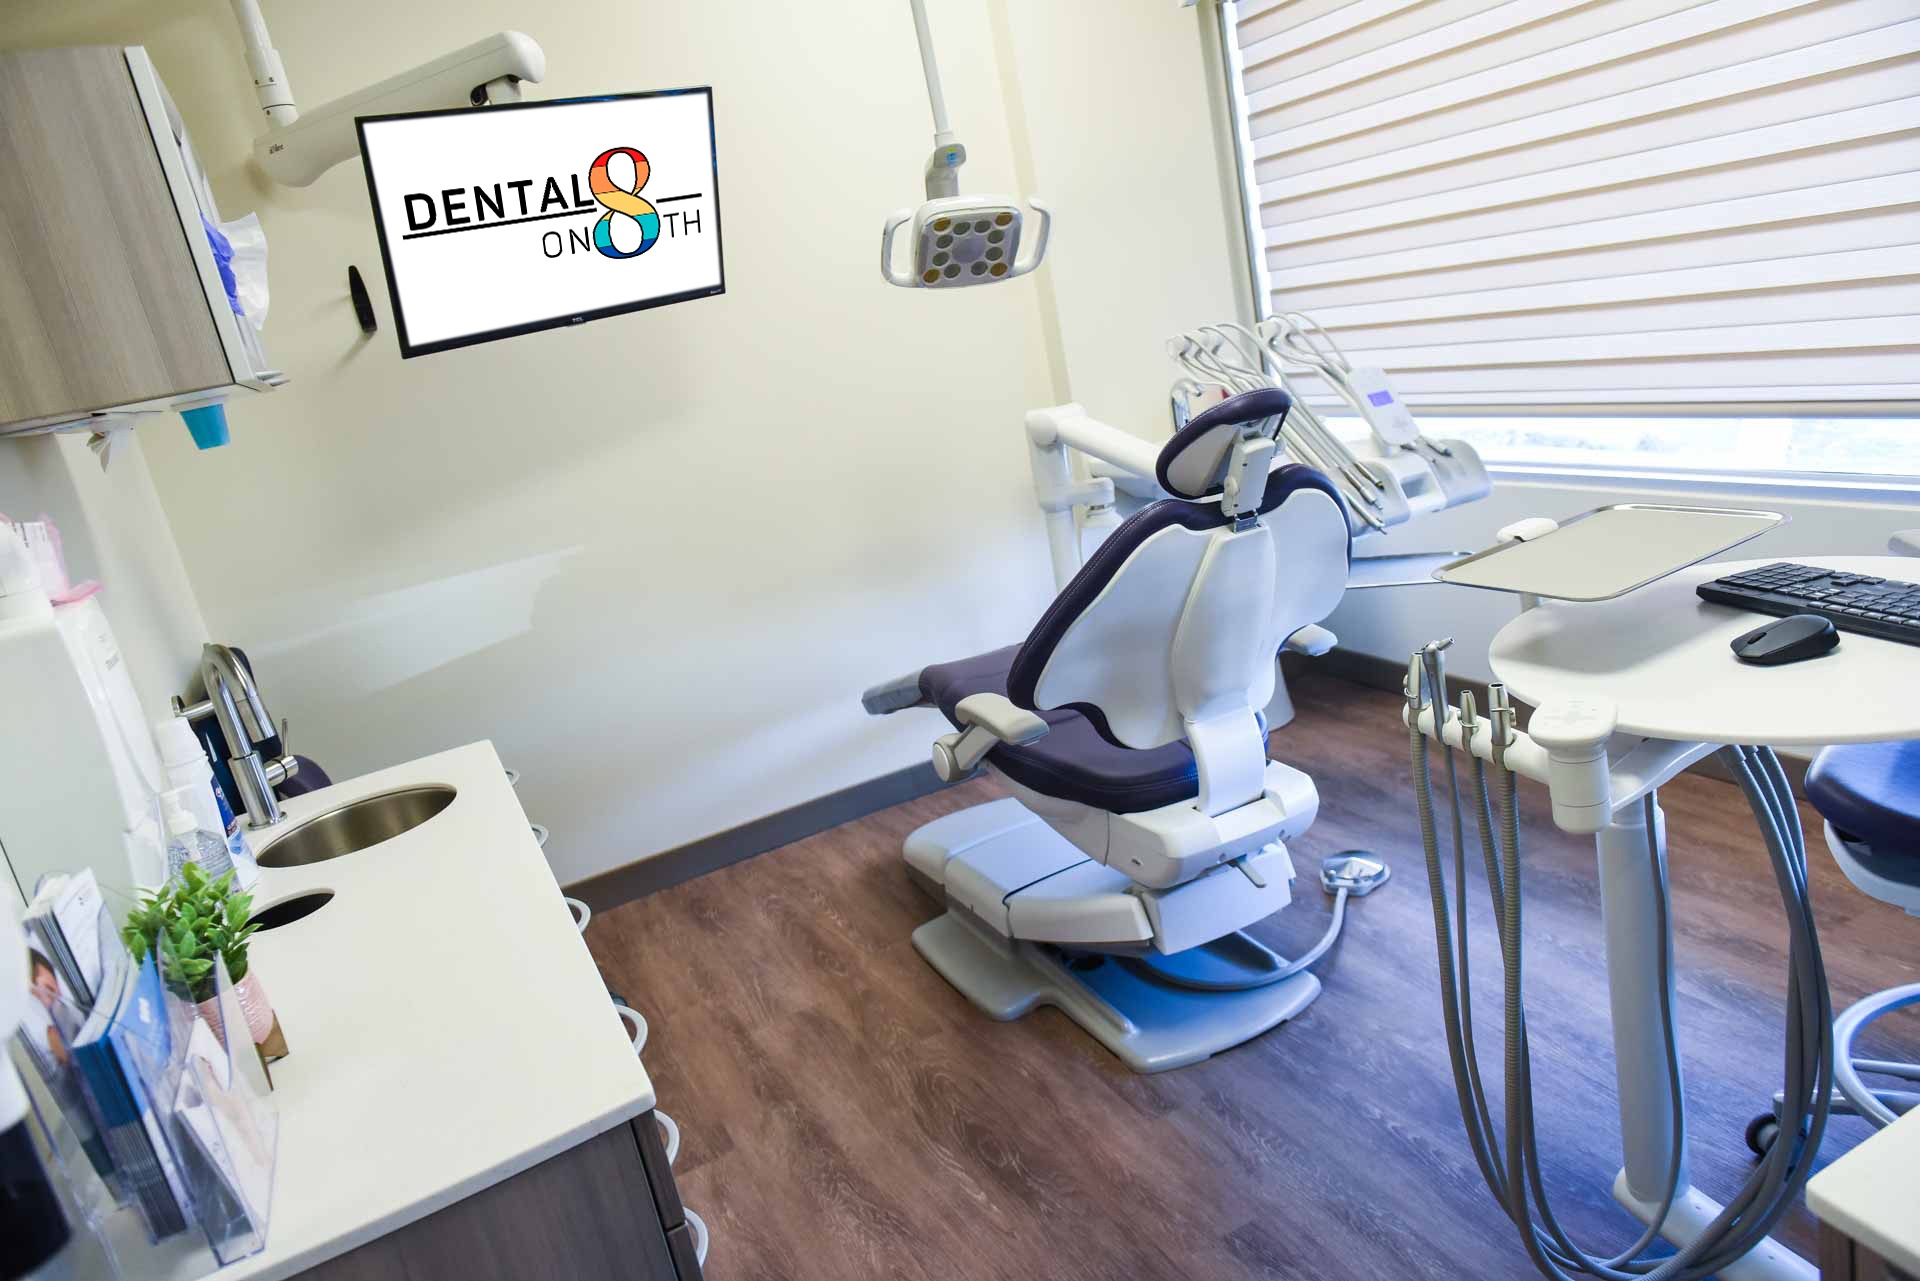 Operatory Suite | Dental on 8th | SE Calgary | General and Family Dentist